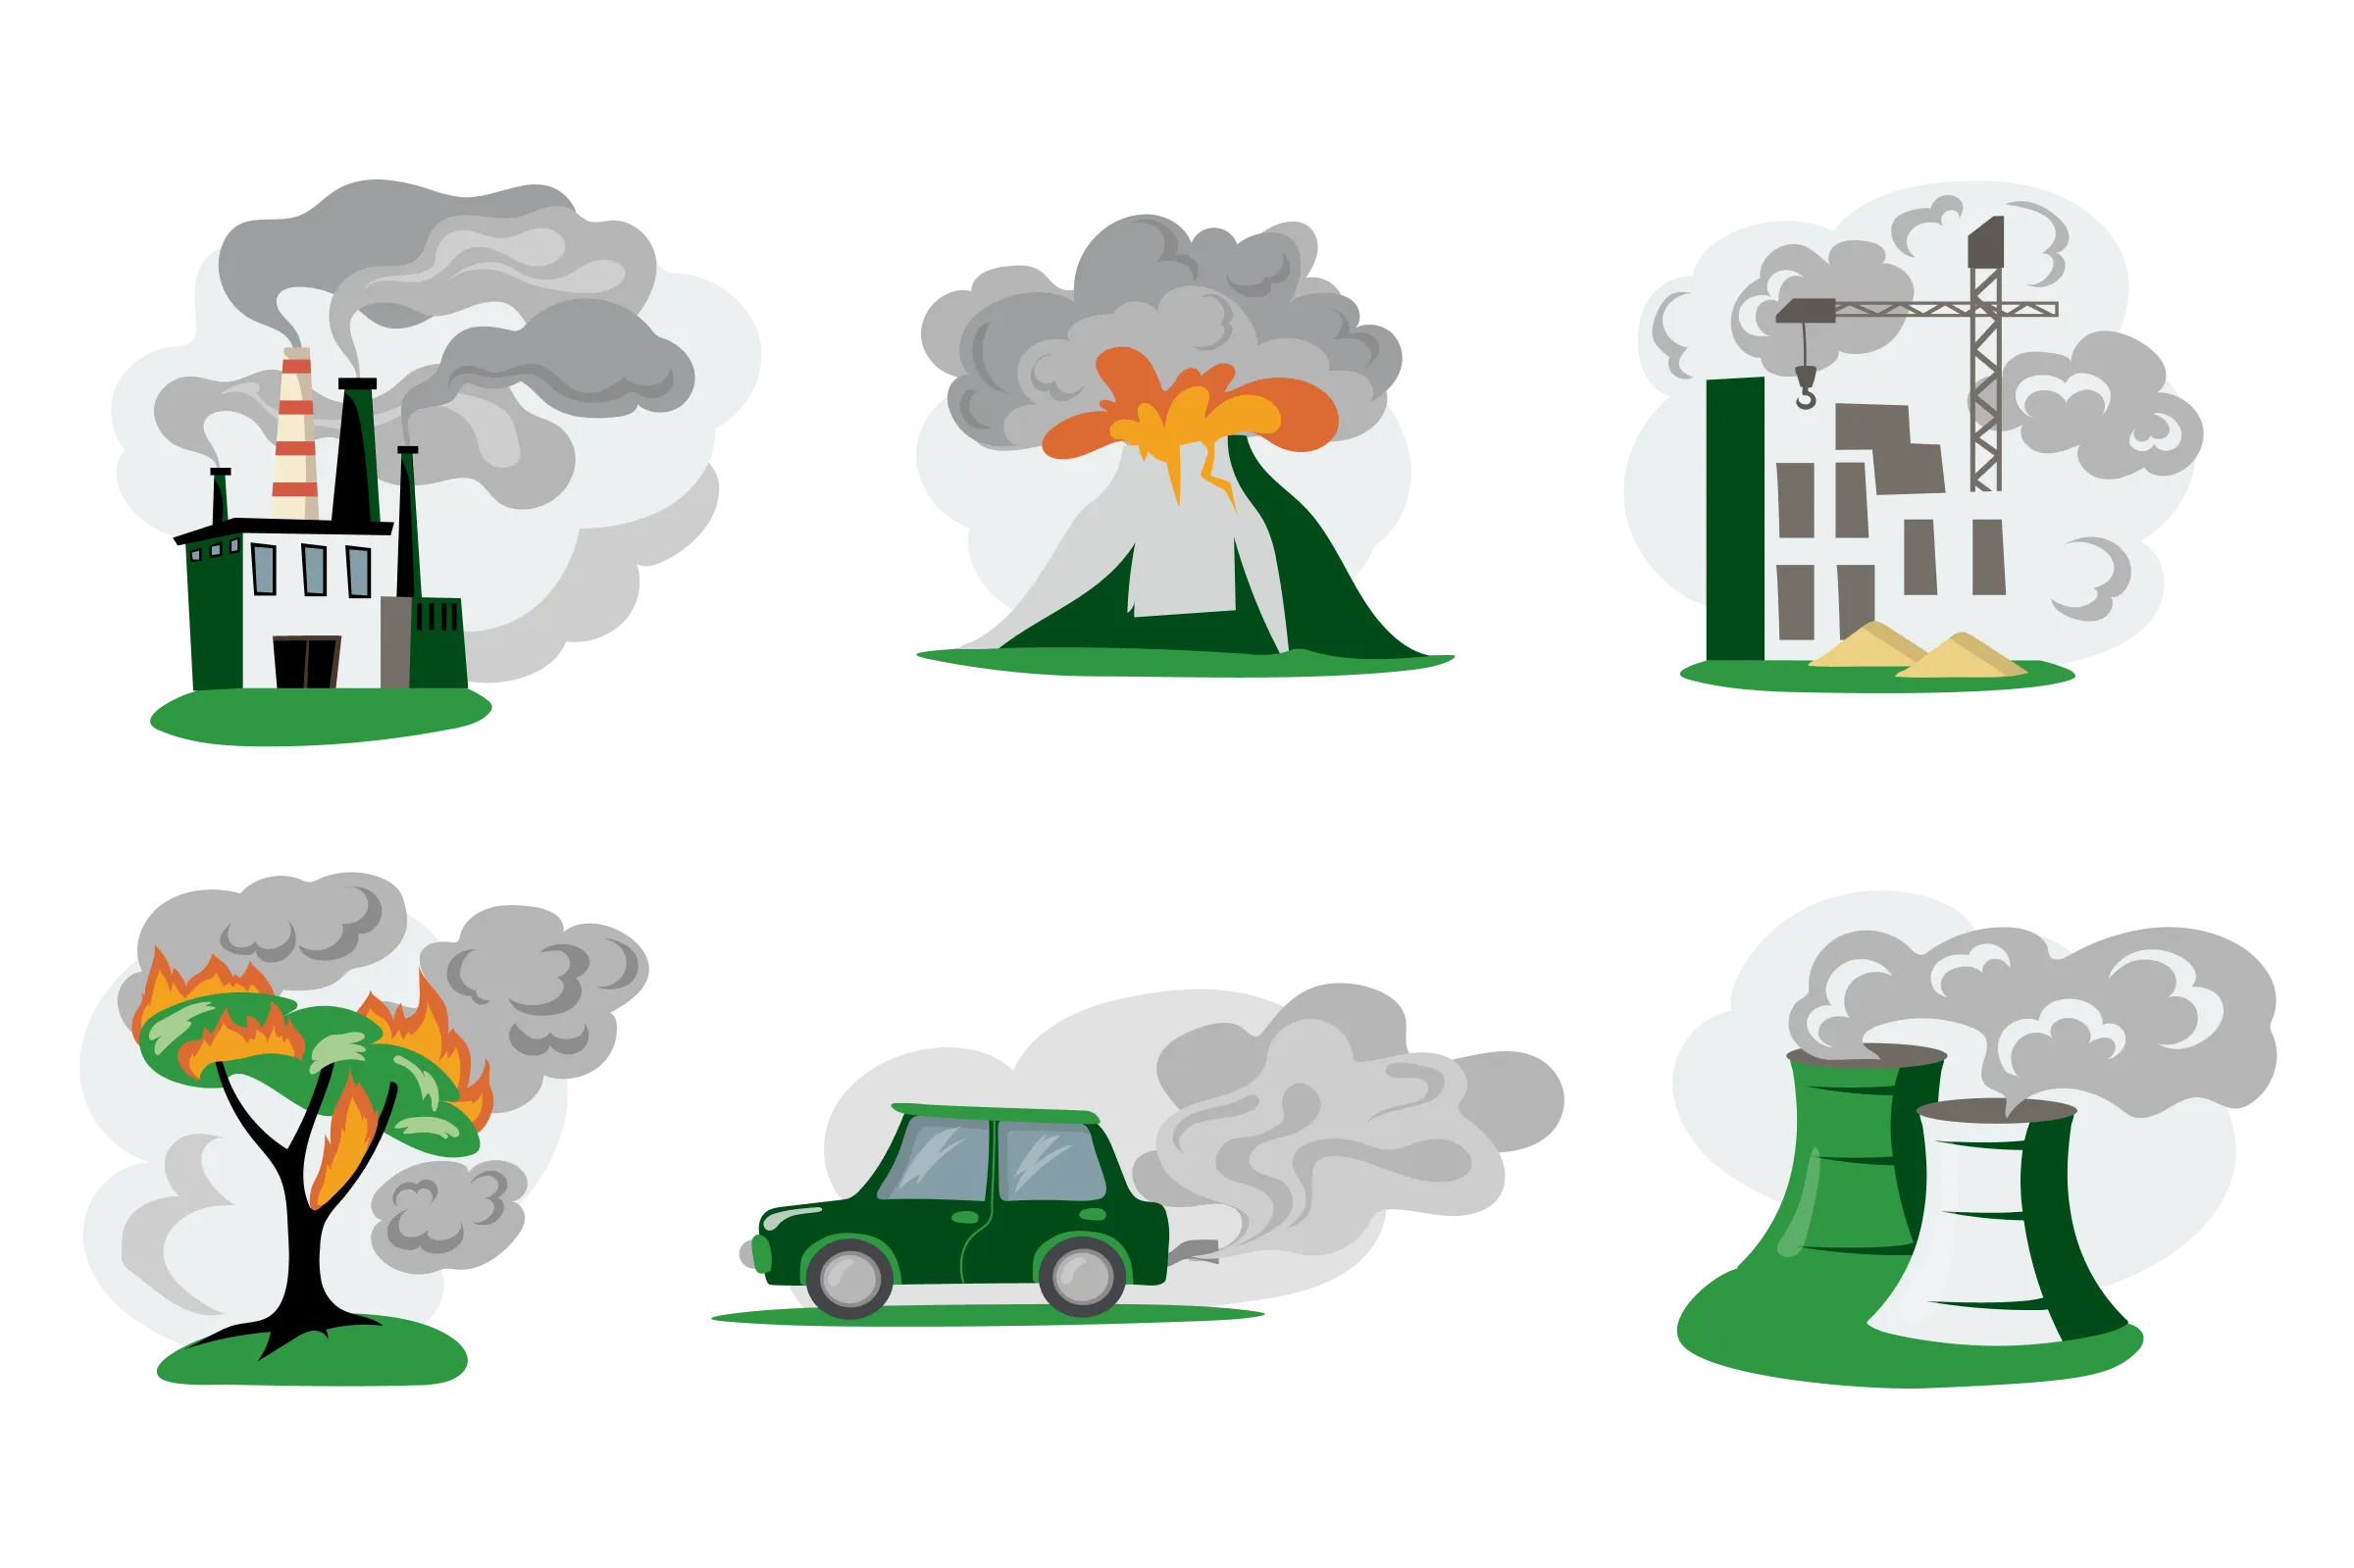 Visual depiction of greenhouse gases - Burning coal and oil, deforestation, and manufacture of products and materials like cement.